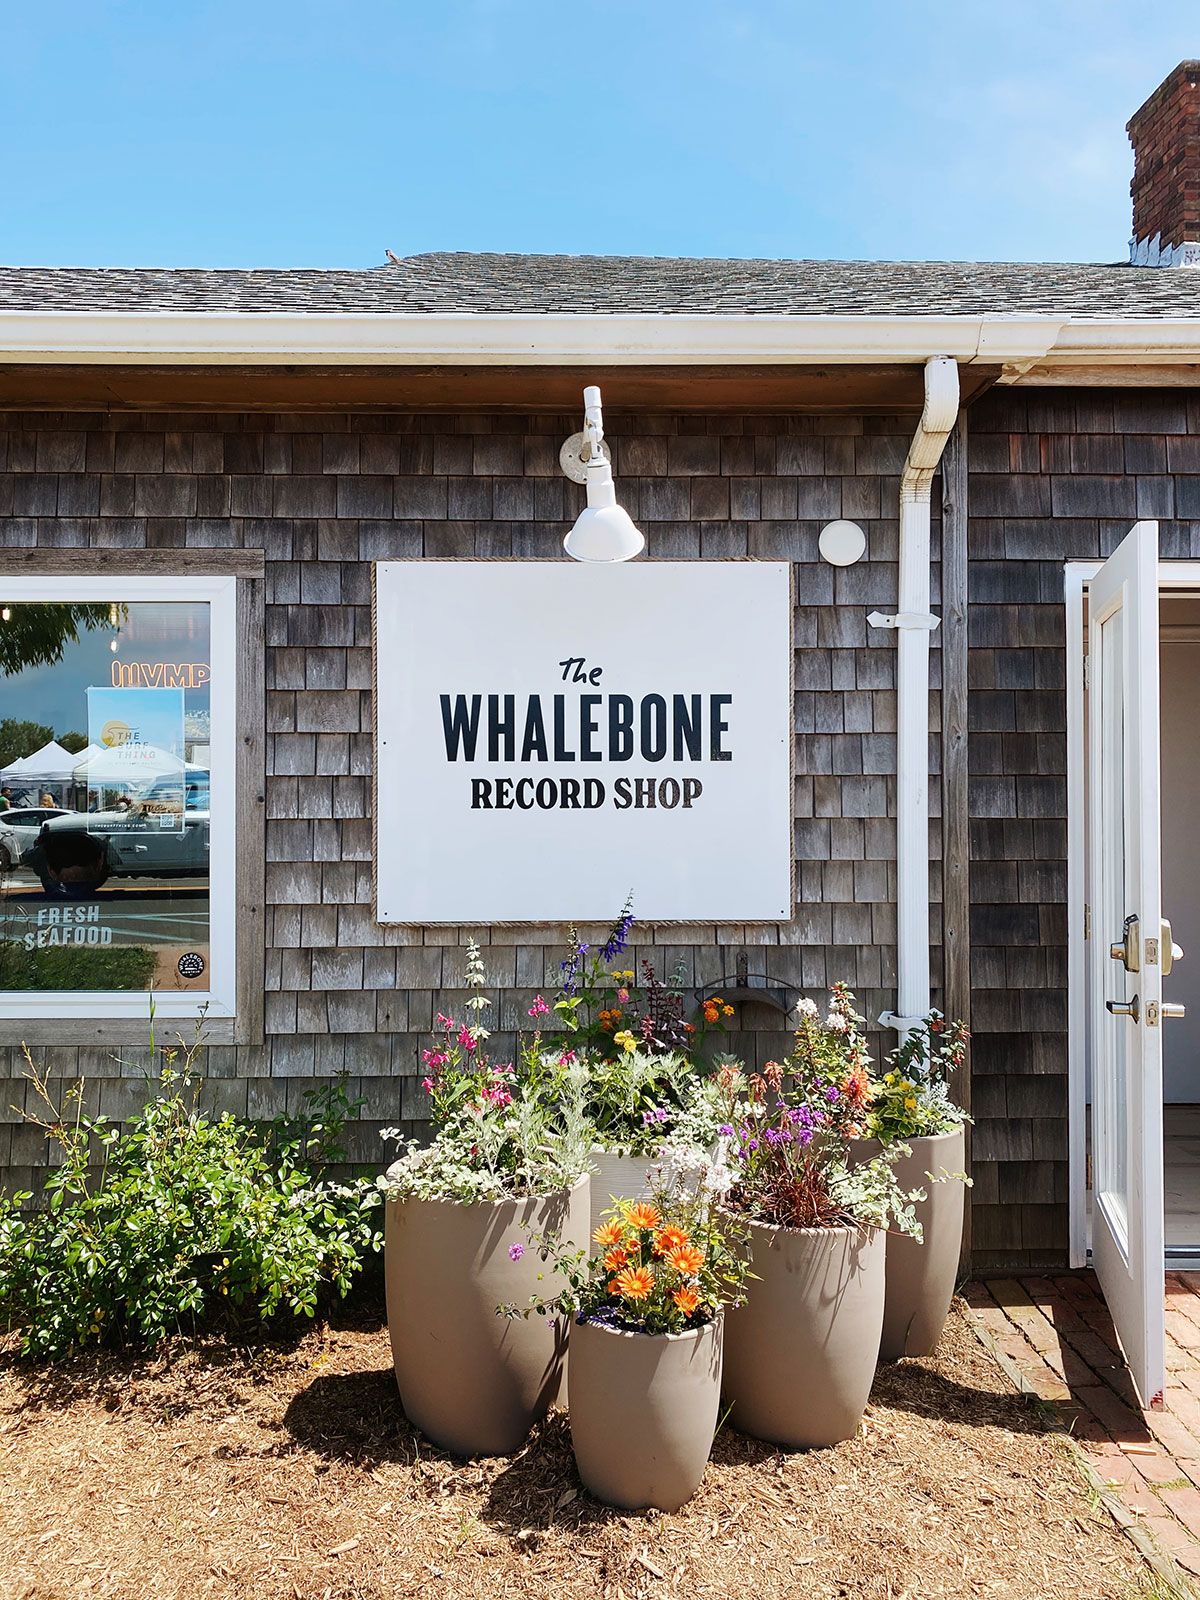 The Whalebone Record Shop storefront in Montauk,NY